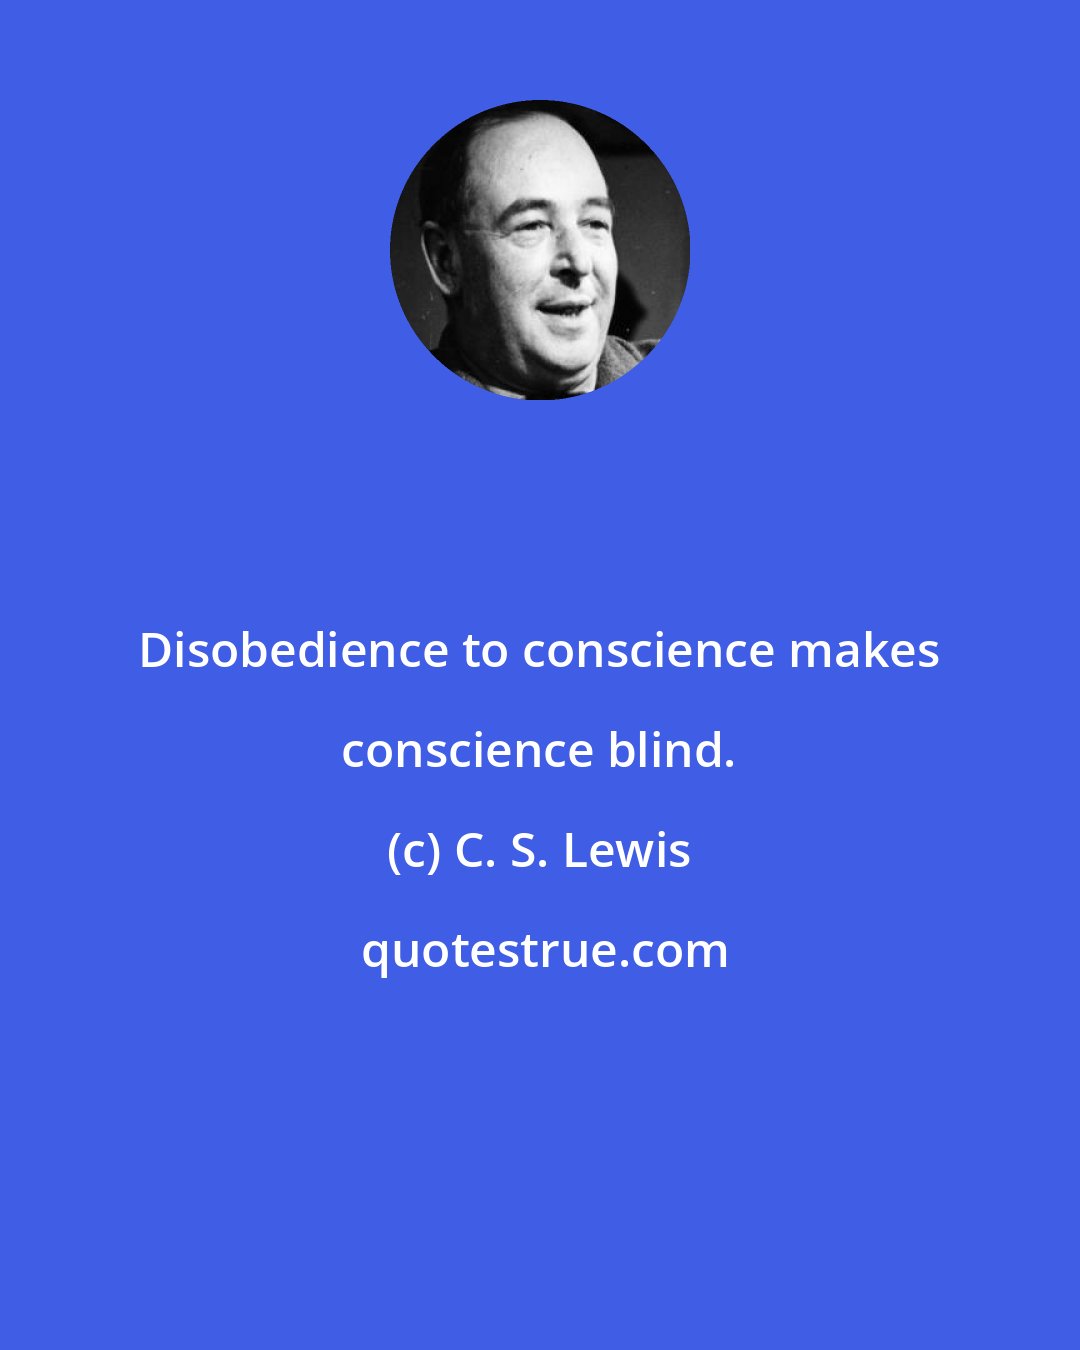 C. S. Lewis: Disobedience to conscience makes conscience blind.